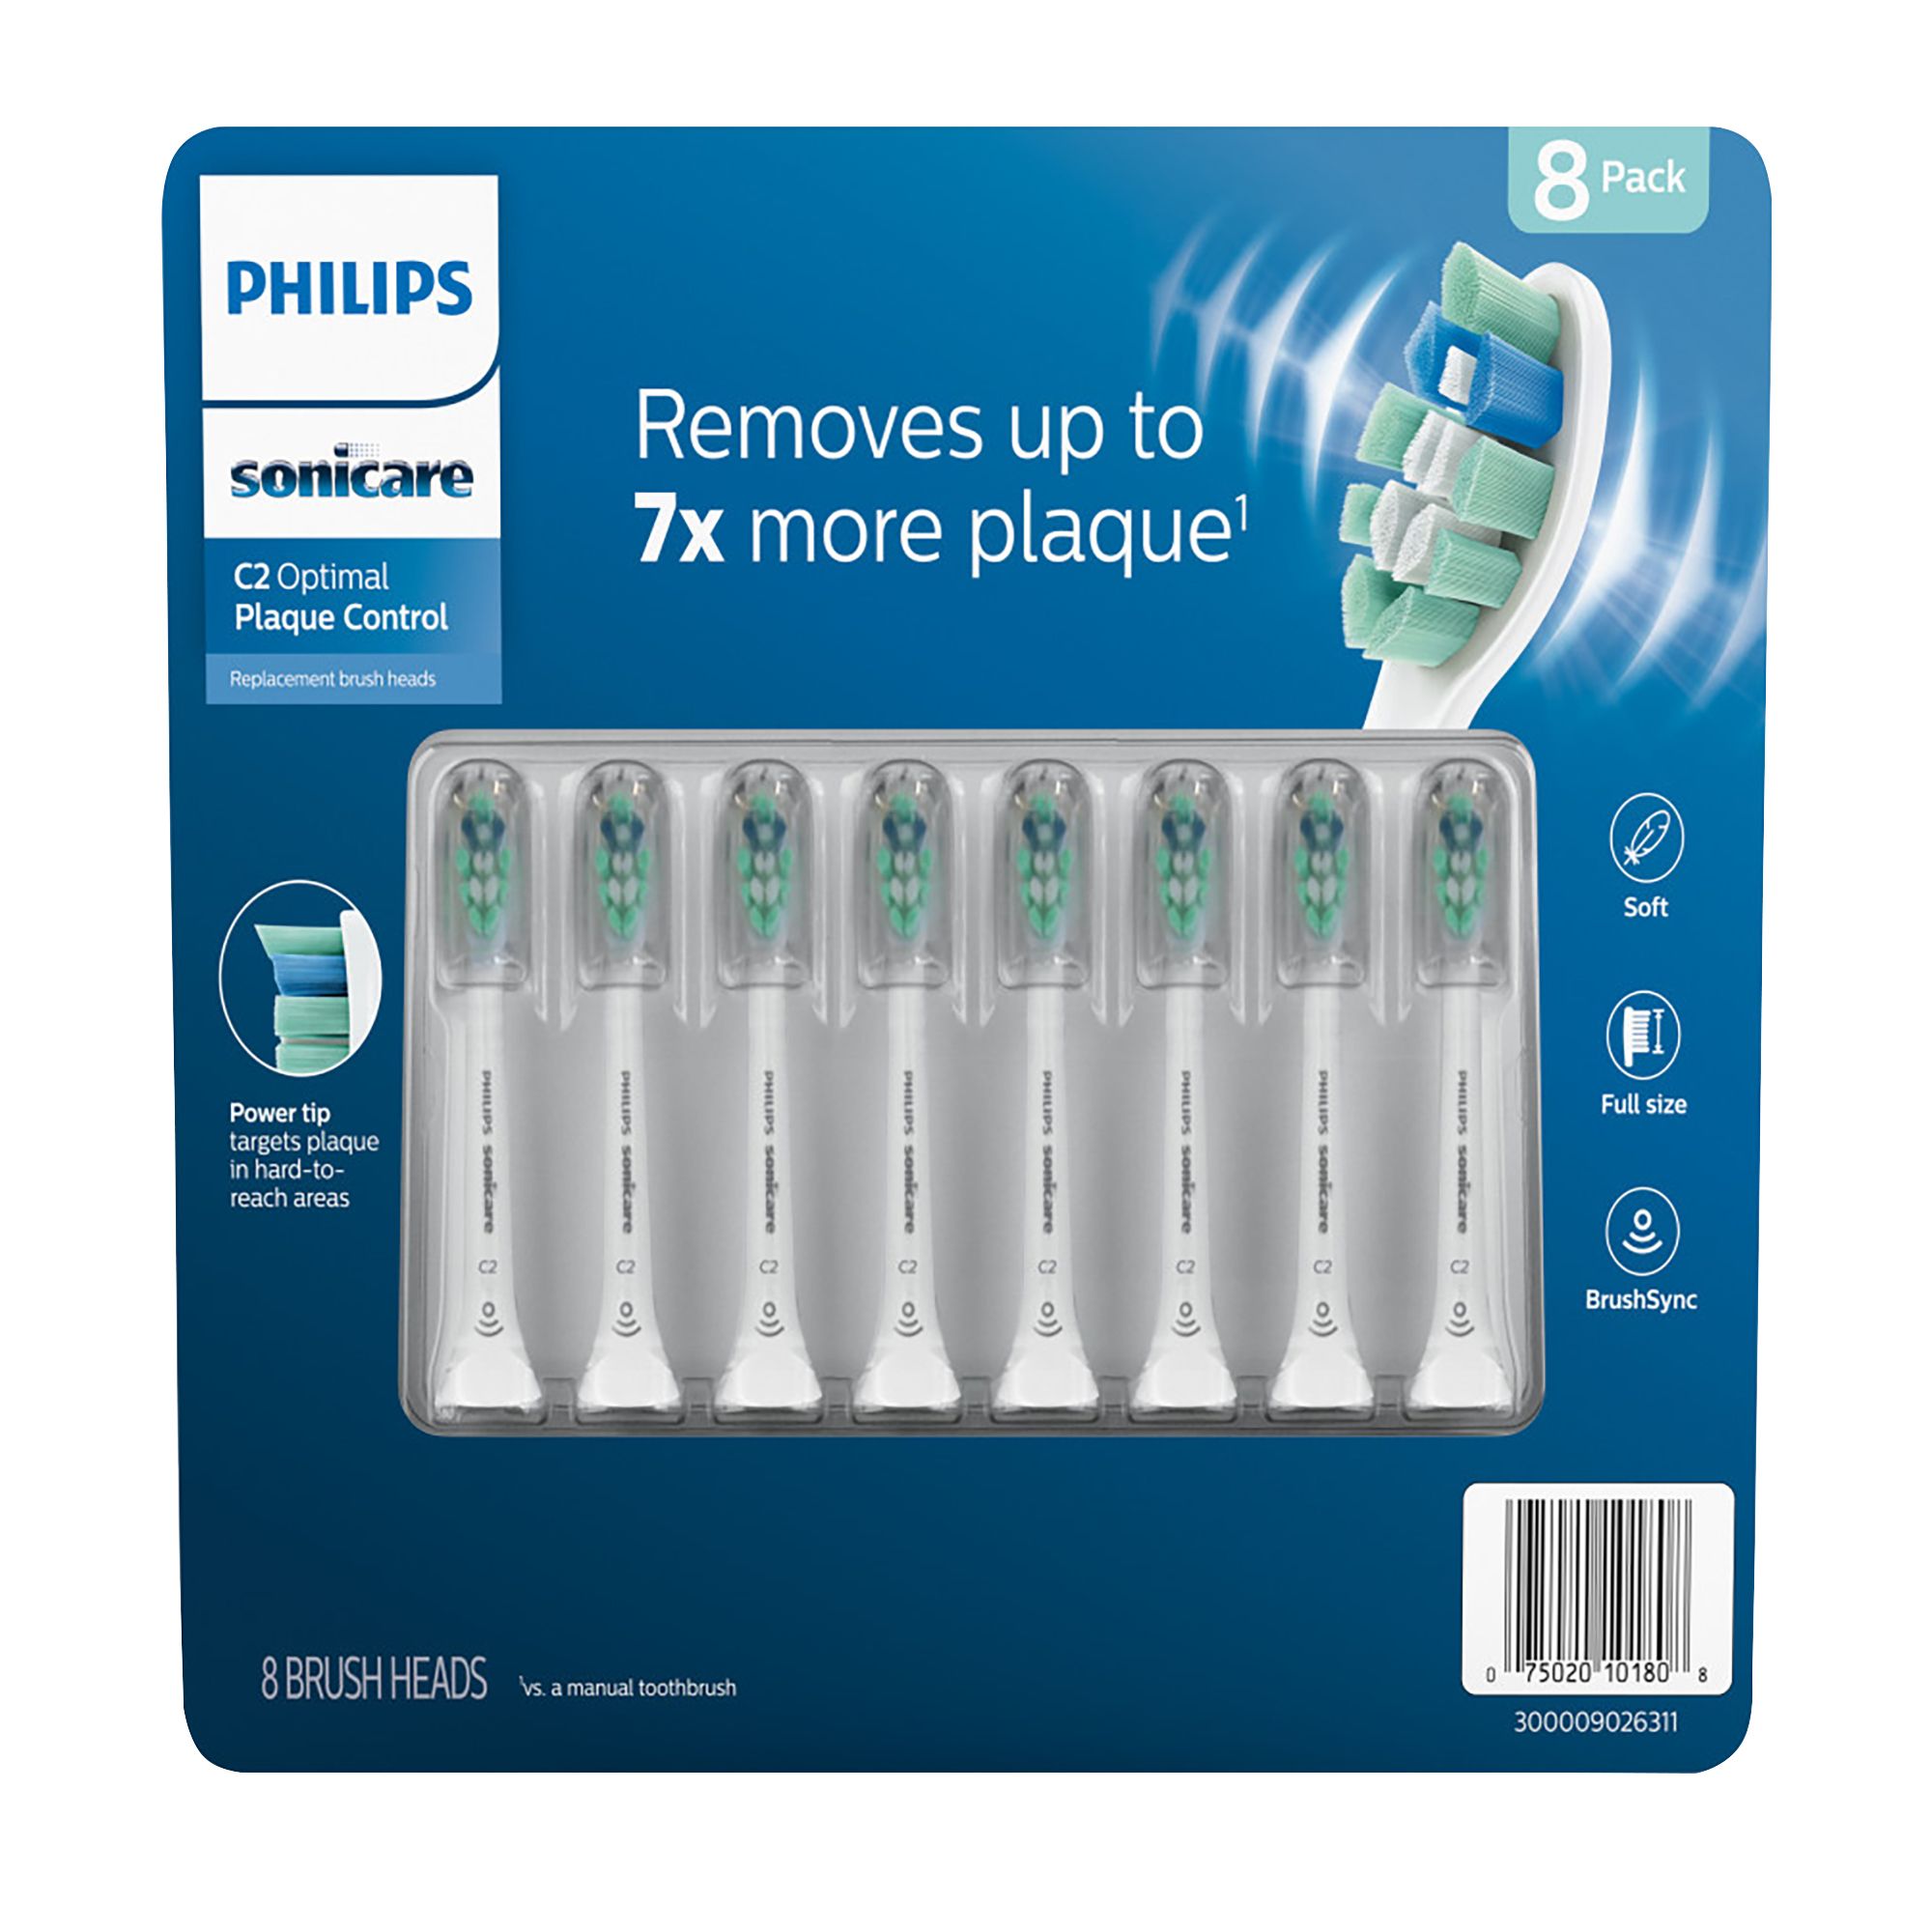 Sonicare Electric Toothbrush Replacement Heads Compatible with All Phillips  Sonicare Click-on Handles,8 Pack